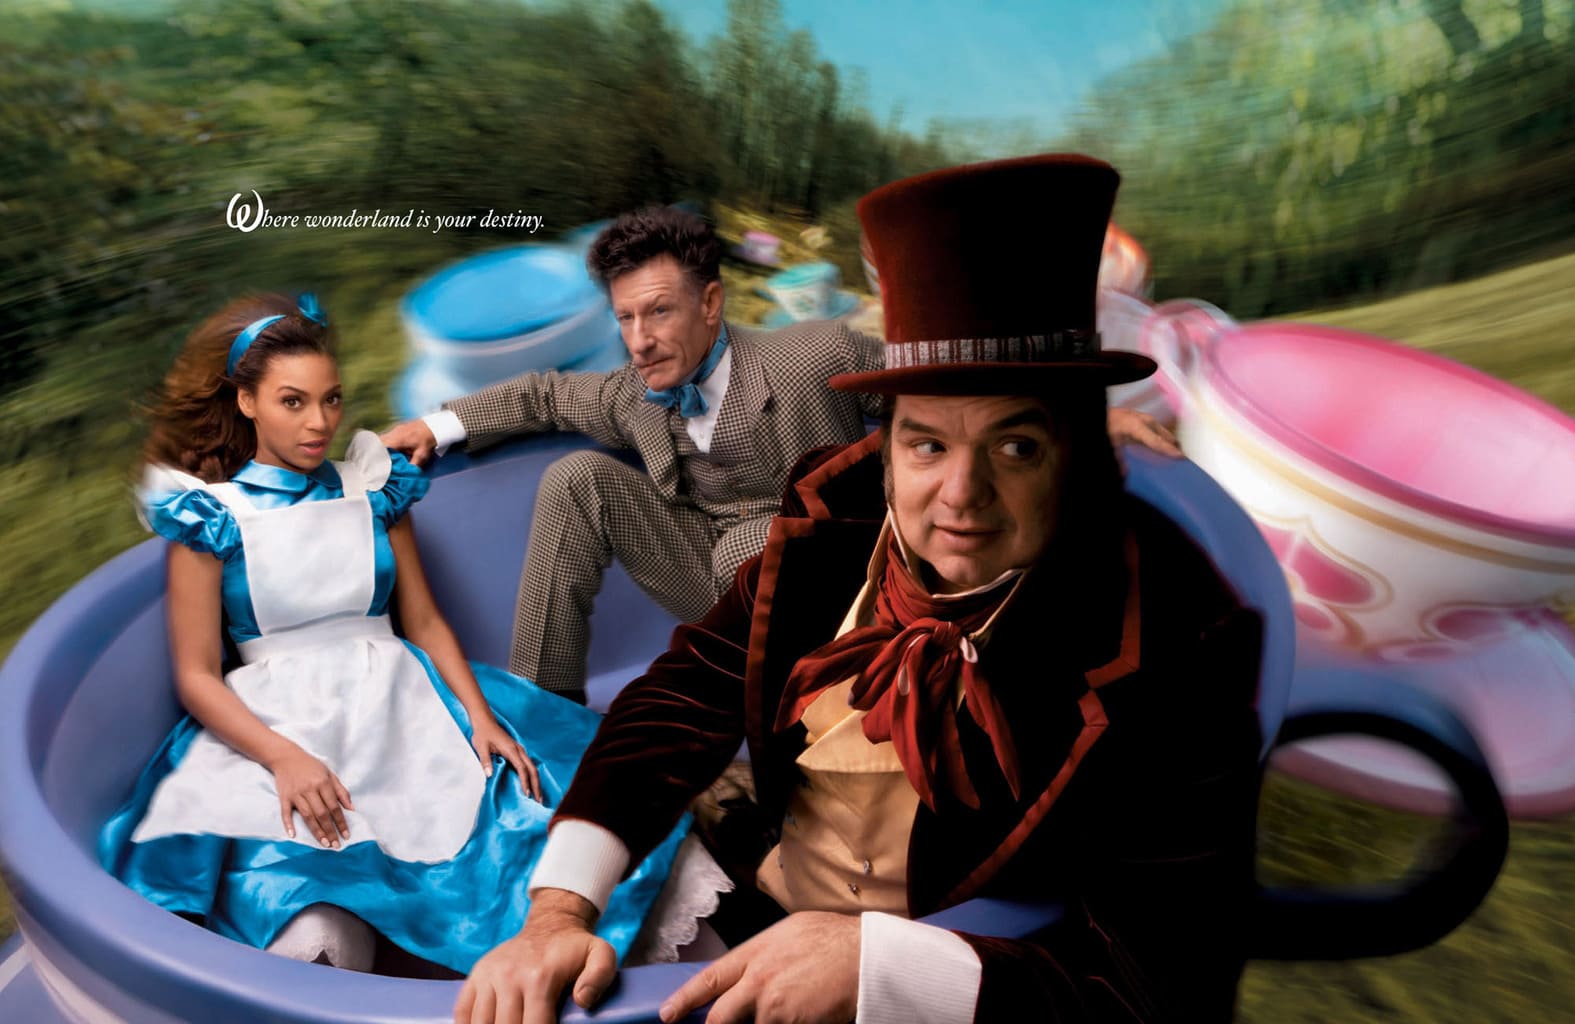 Alice inside the Disney campaign made by Annie Leibovitz